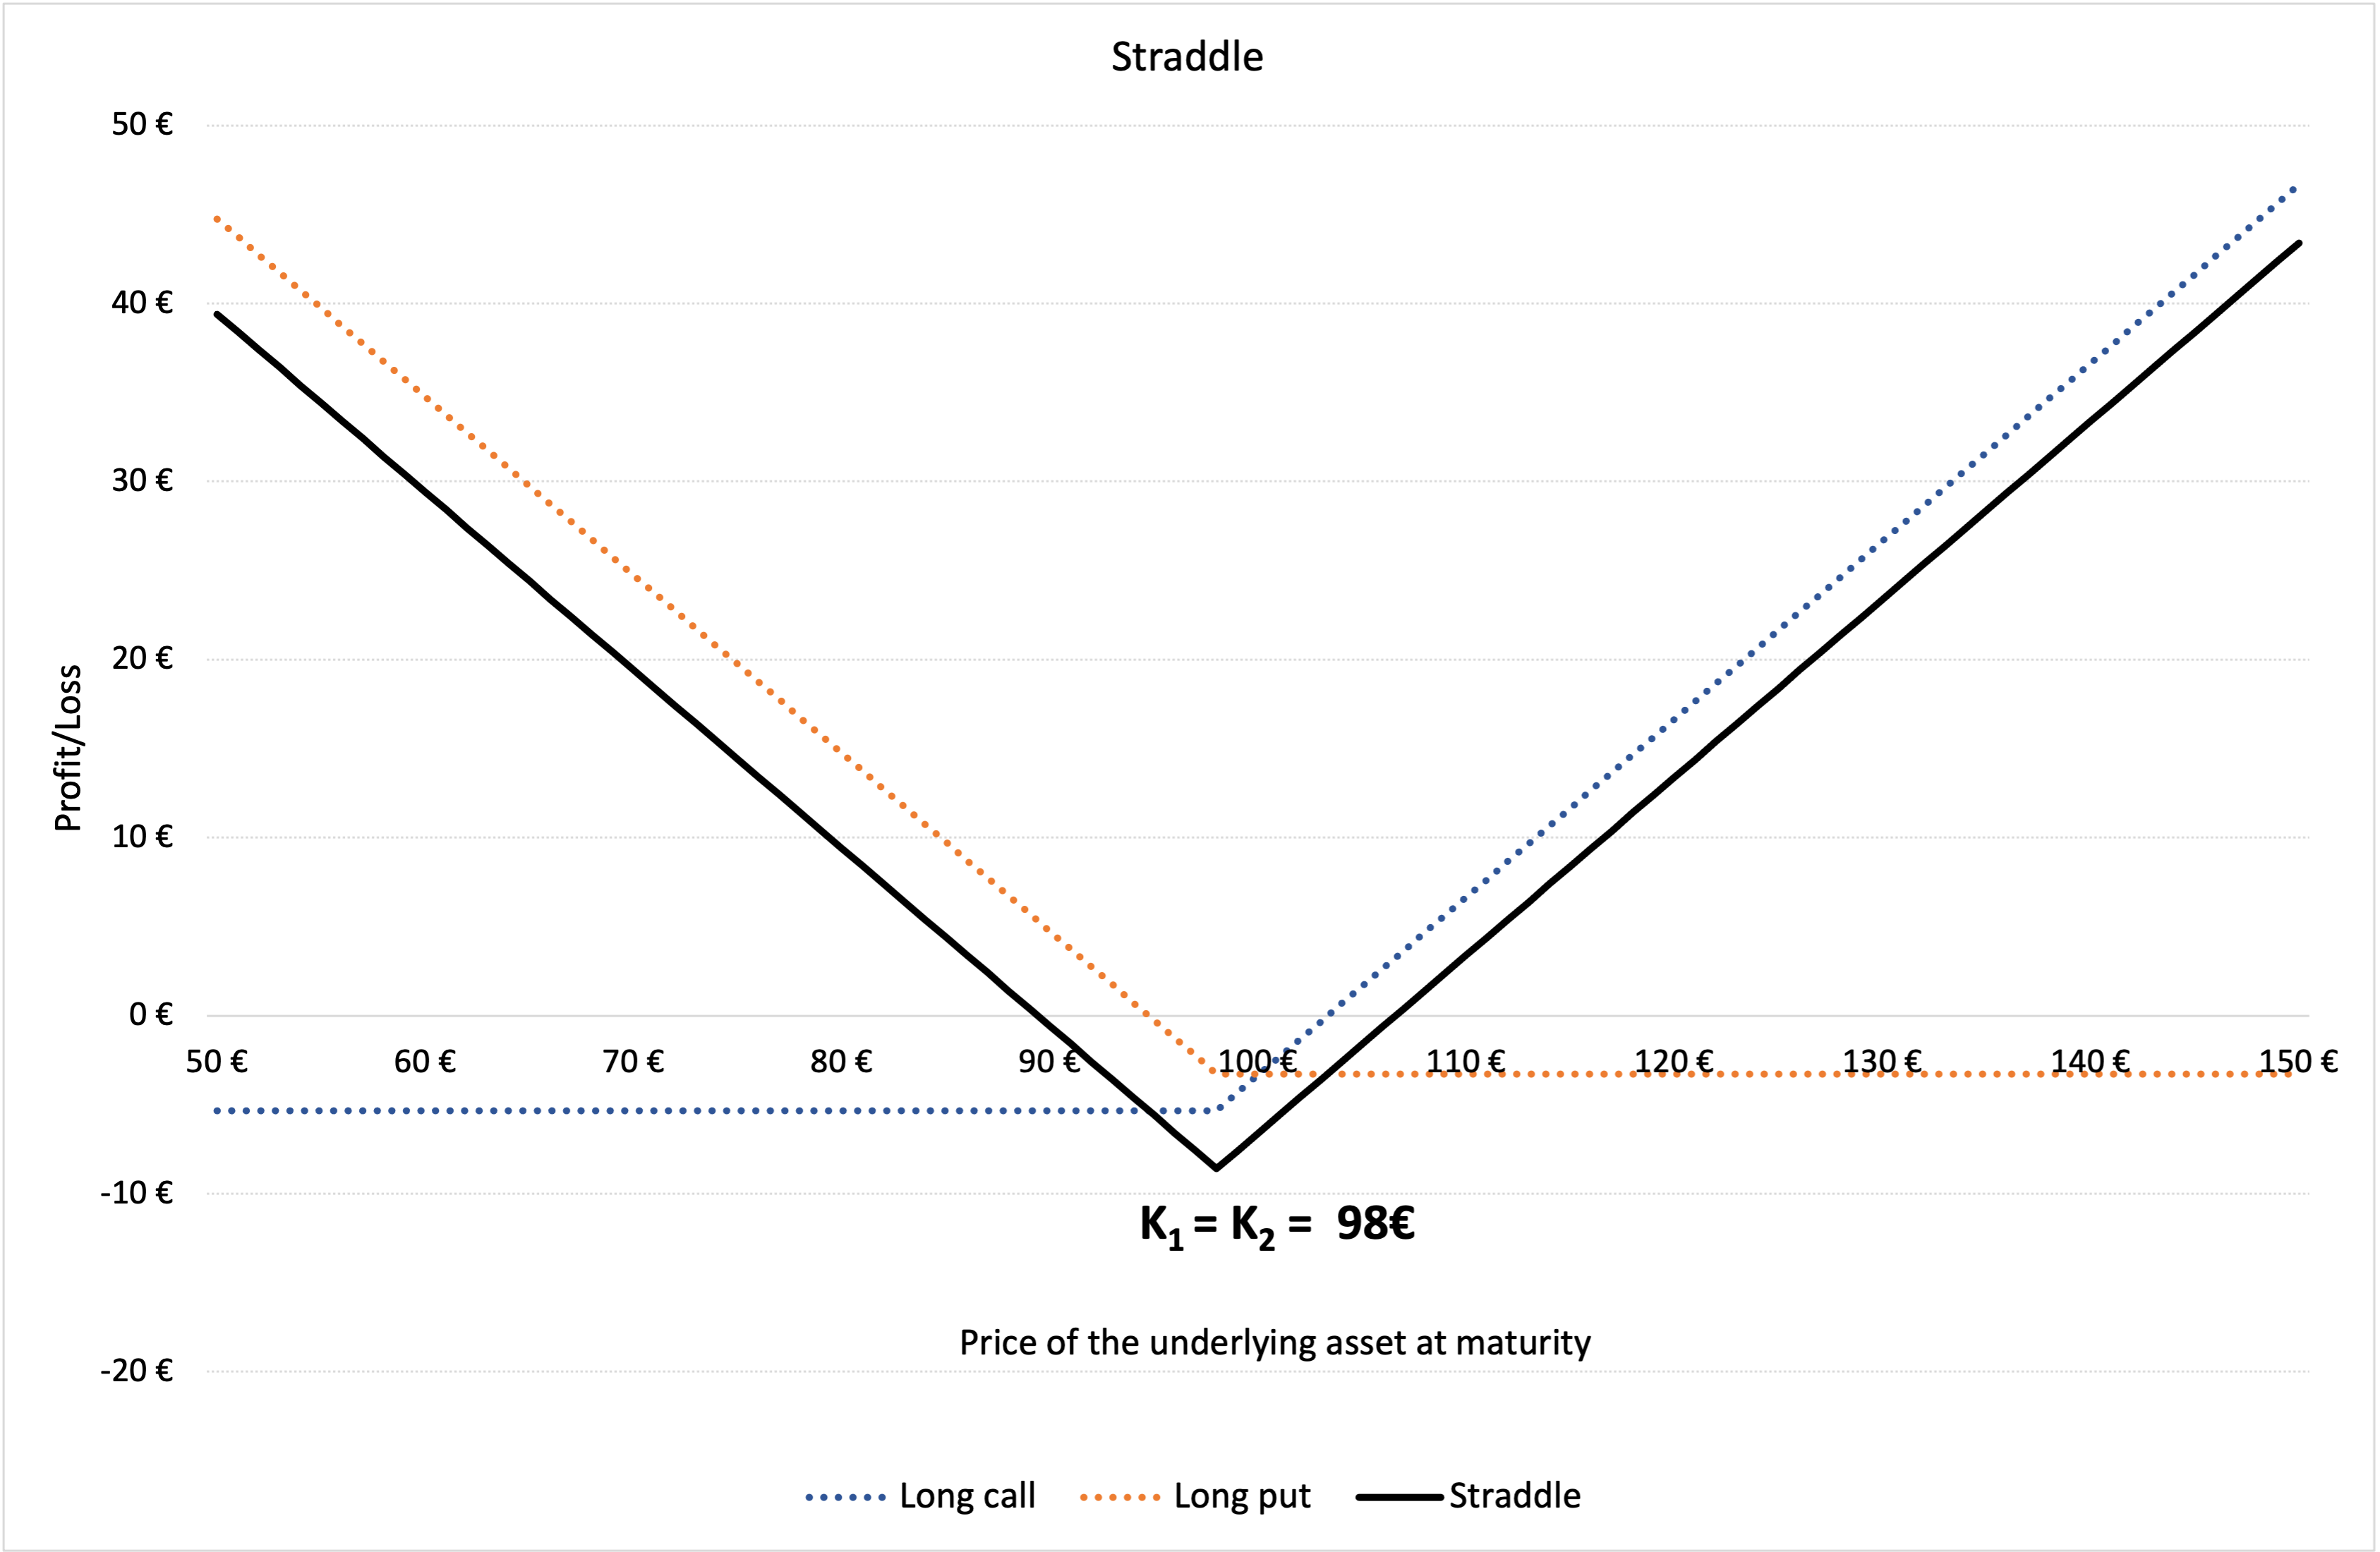  Profit and loss (P&L) function of a straddle